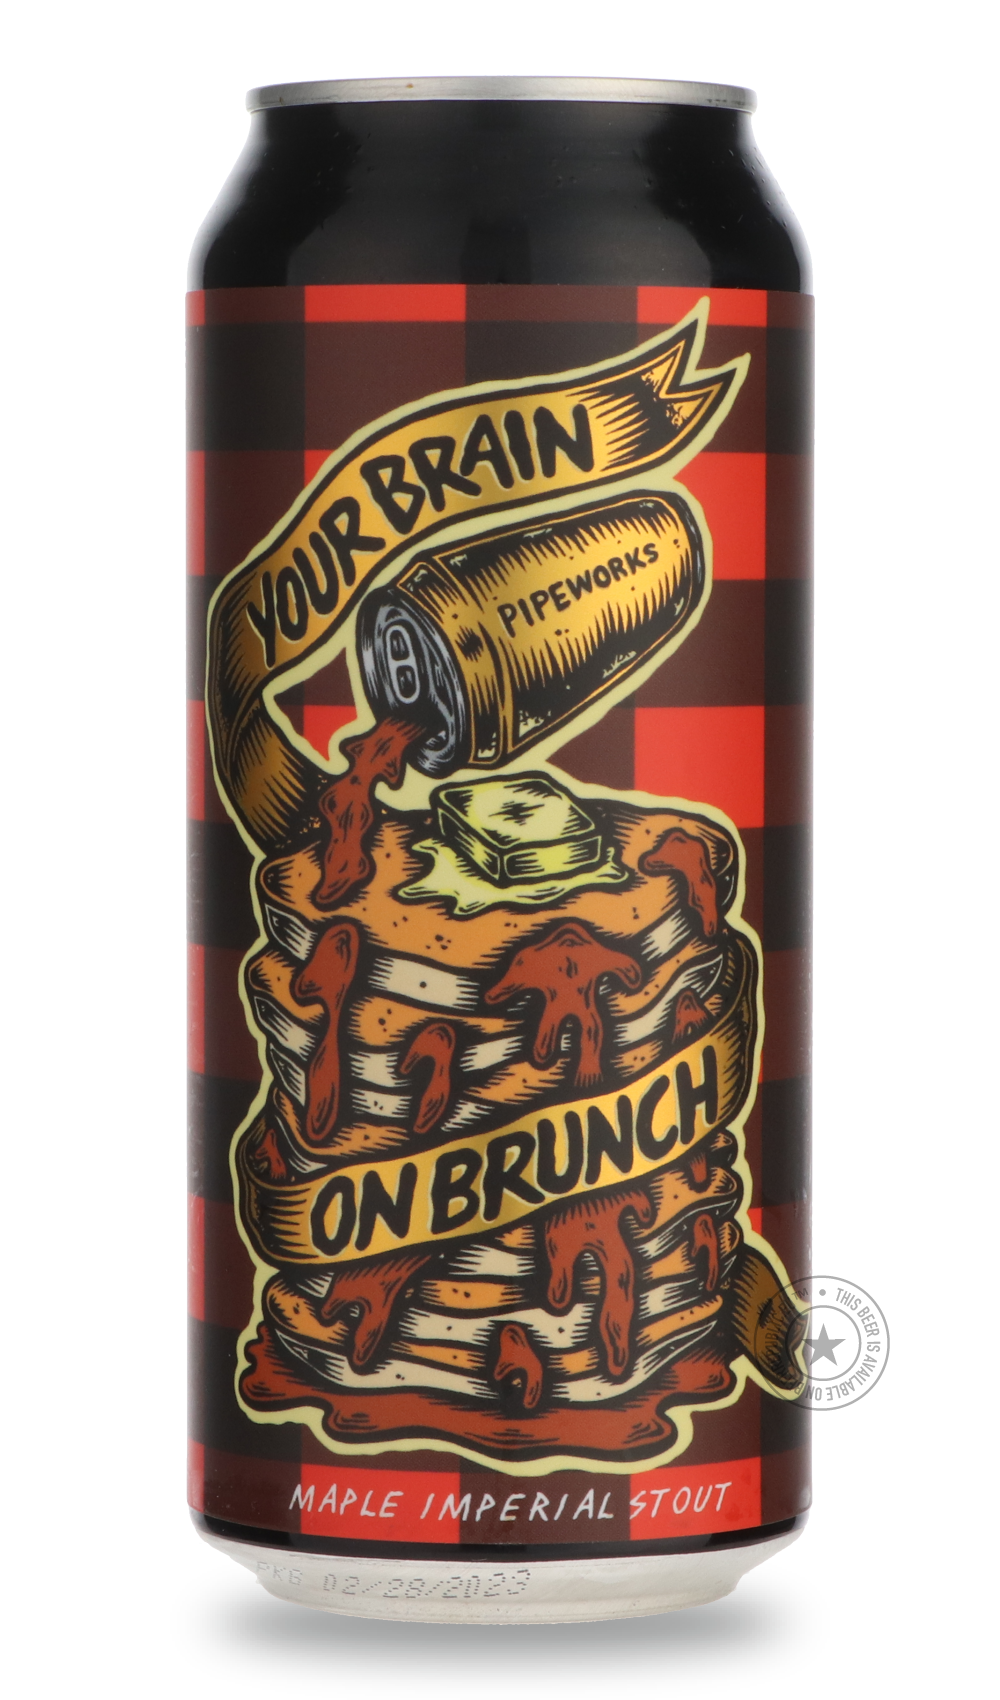 -Pipeworks- Your Brain On Brunch-Stout & Porter- Only @ Beer Republic - The best online beer store for American & Canadian craft beer - Buy beer online from the USA and Canada - Bier online kopen - Amerikaans bier kopen - Craft beer store - Craft beer kopen - Amerikanisch bier kaufen - Bier online kaufen - Acheter biere online - IPA - Stout - Porter - New England IPA - Hazy IPA - Imperial Stout - Barrel Aged - Barrel Aged Imperial Stout - Brown - Dark beer - Blond - Blonde - Pilsner - Lager - Wheat - Weizen